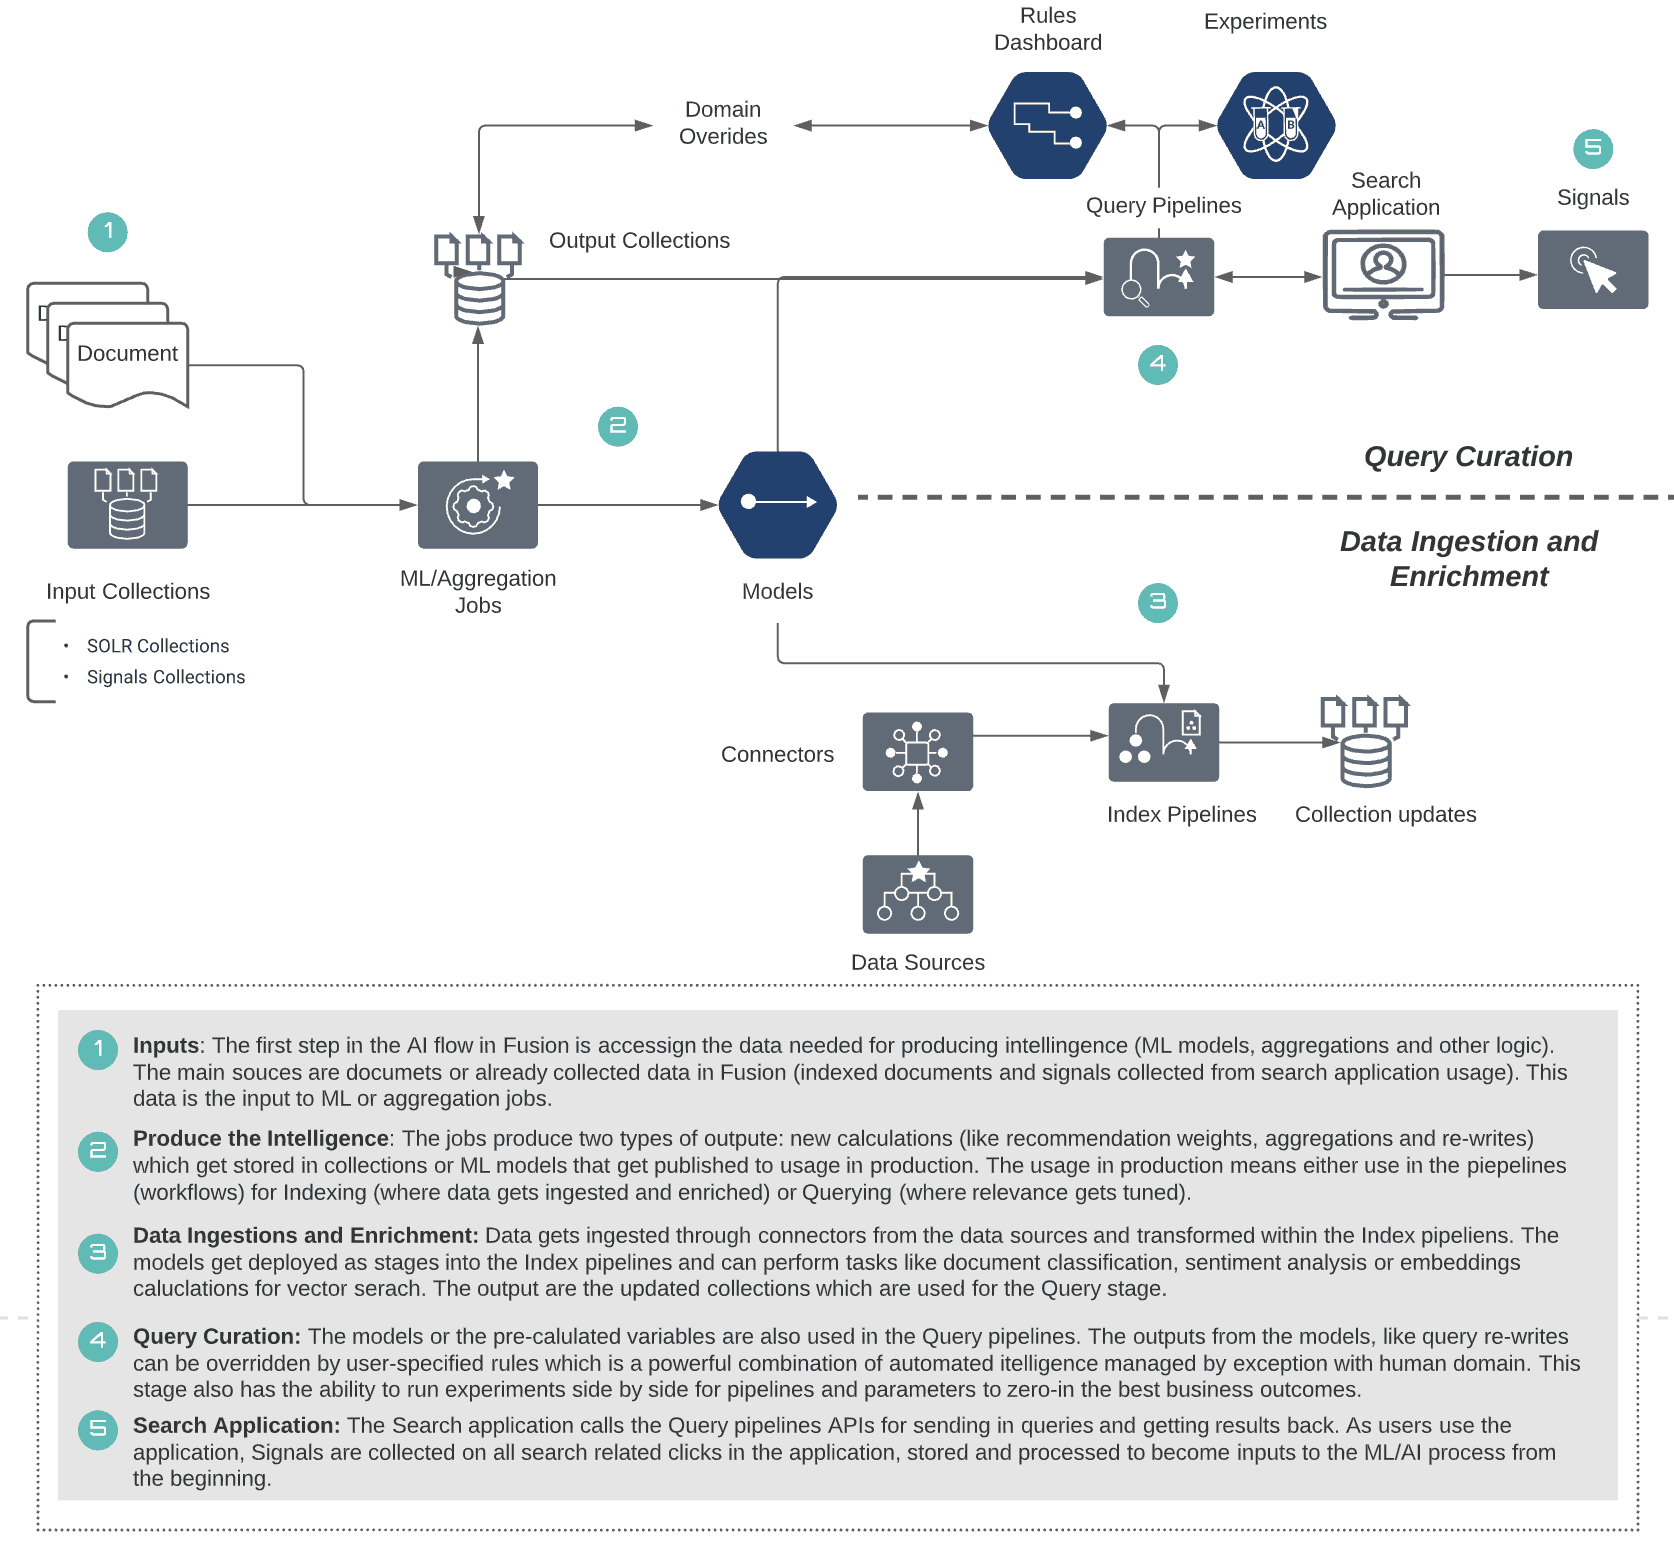 A flow chart of the process of AI and data flow 